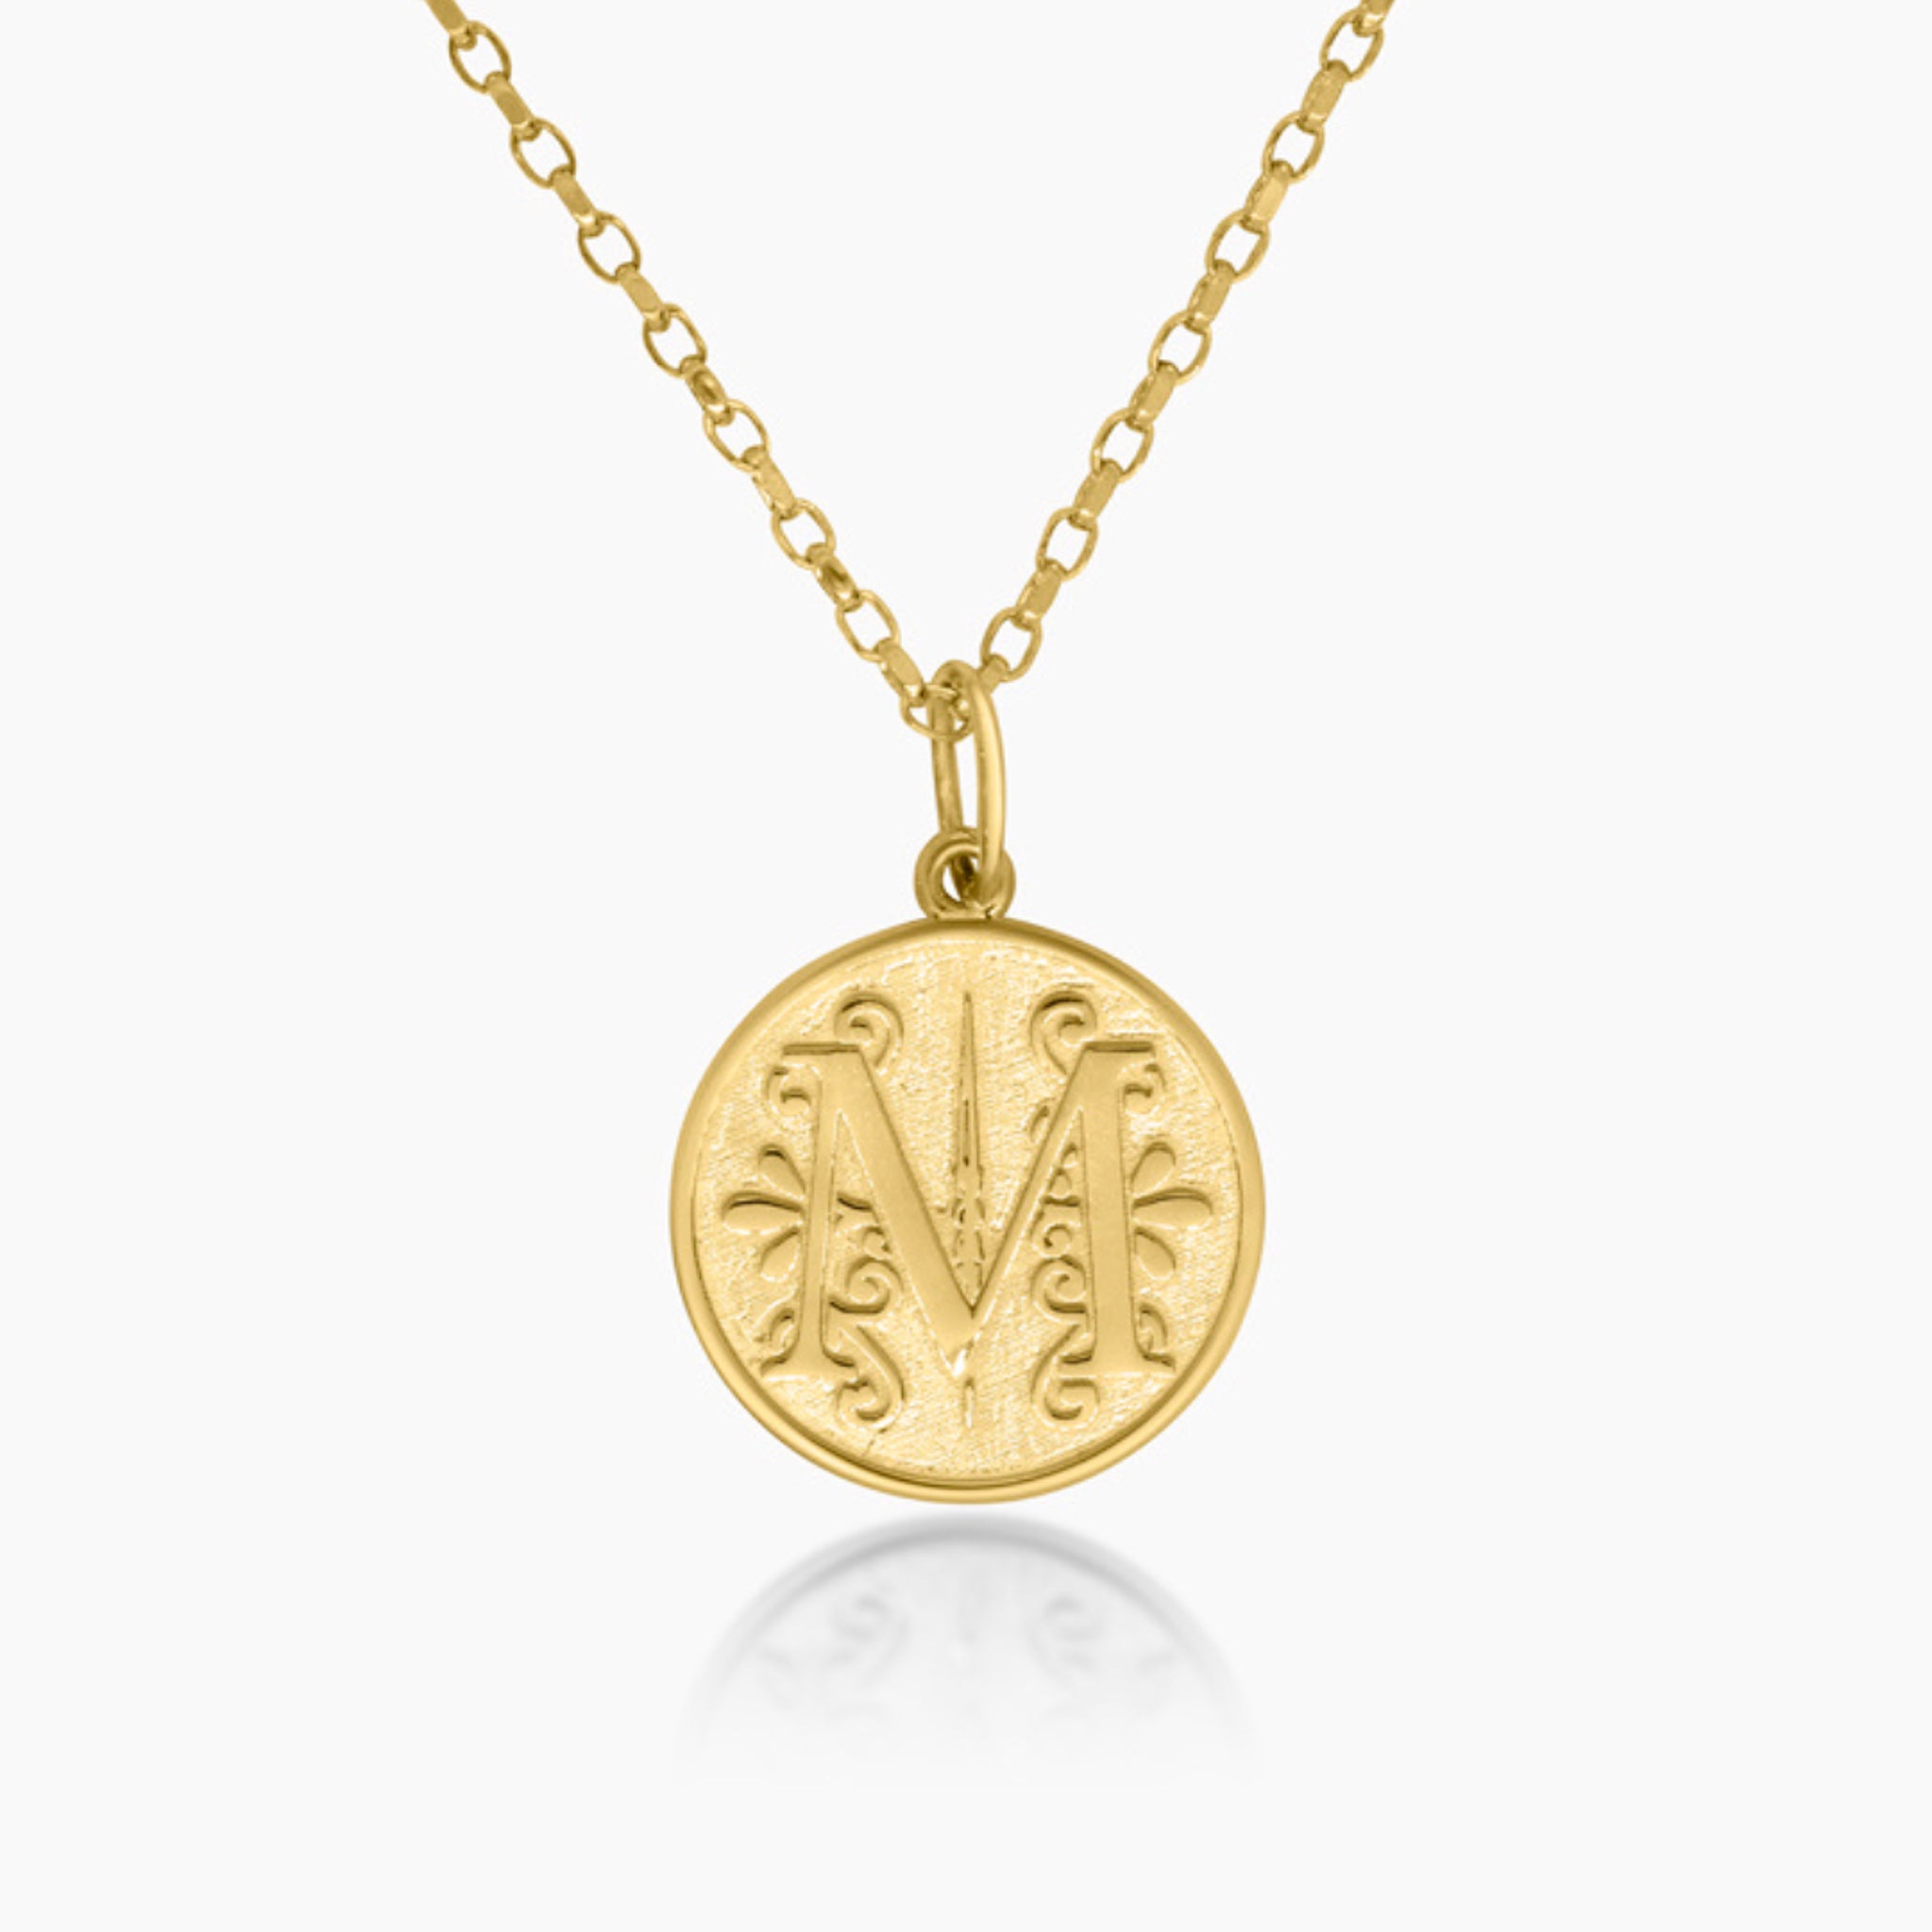 14K YELLOW GOLD REGAL COIN INITIAL NECKLACE